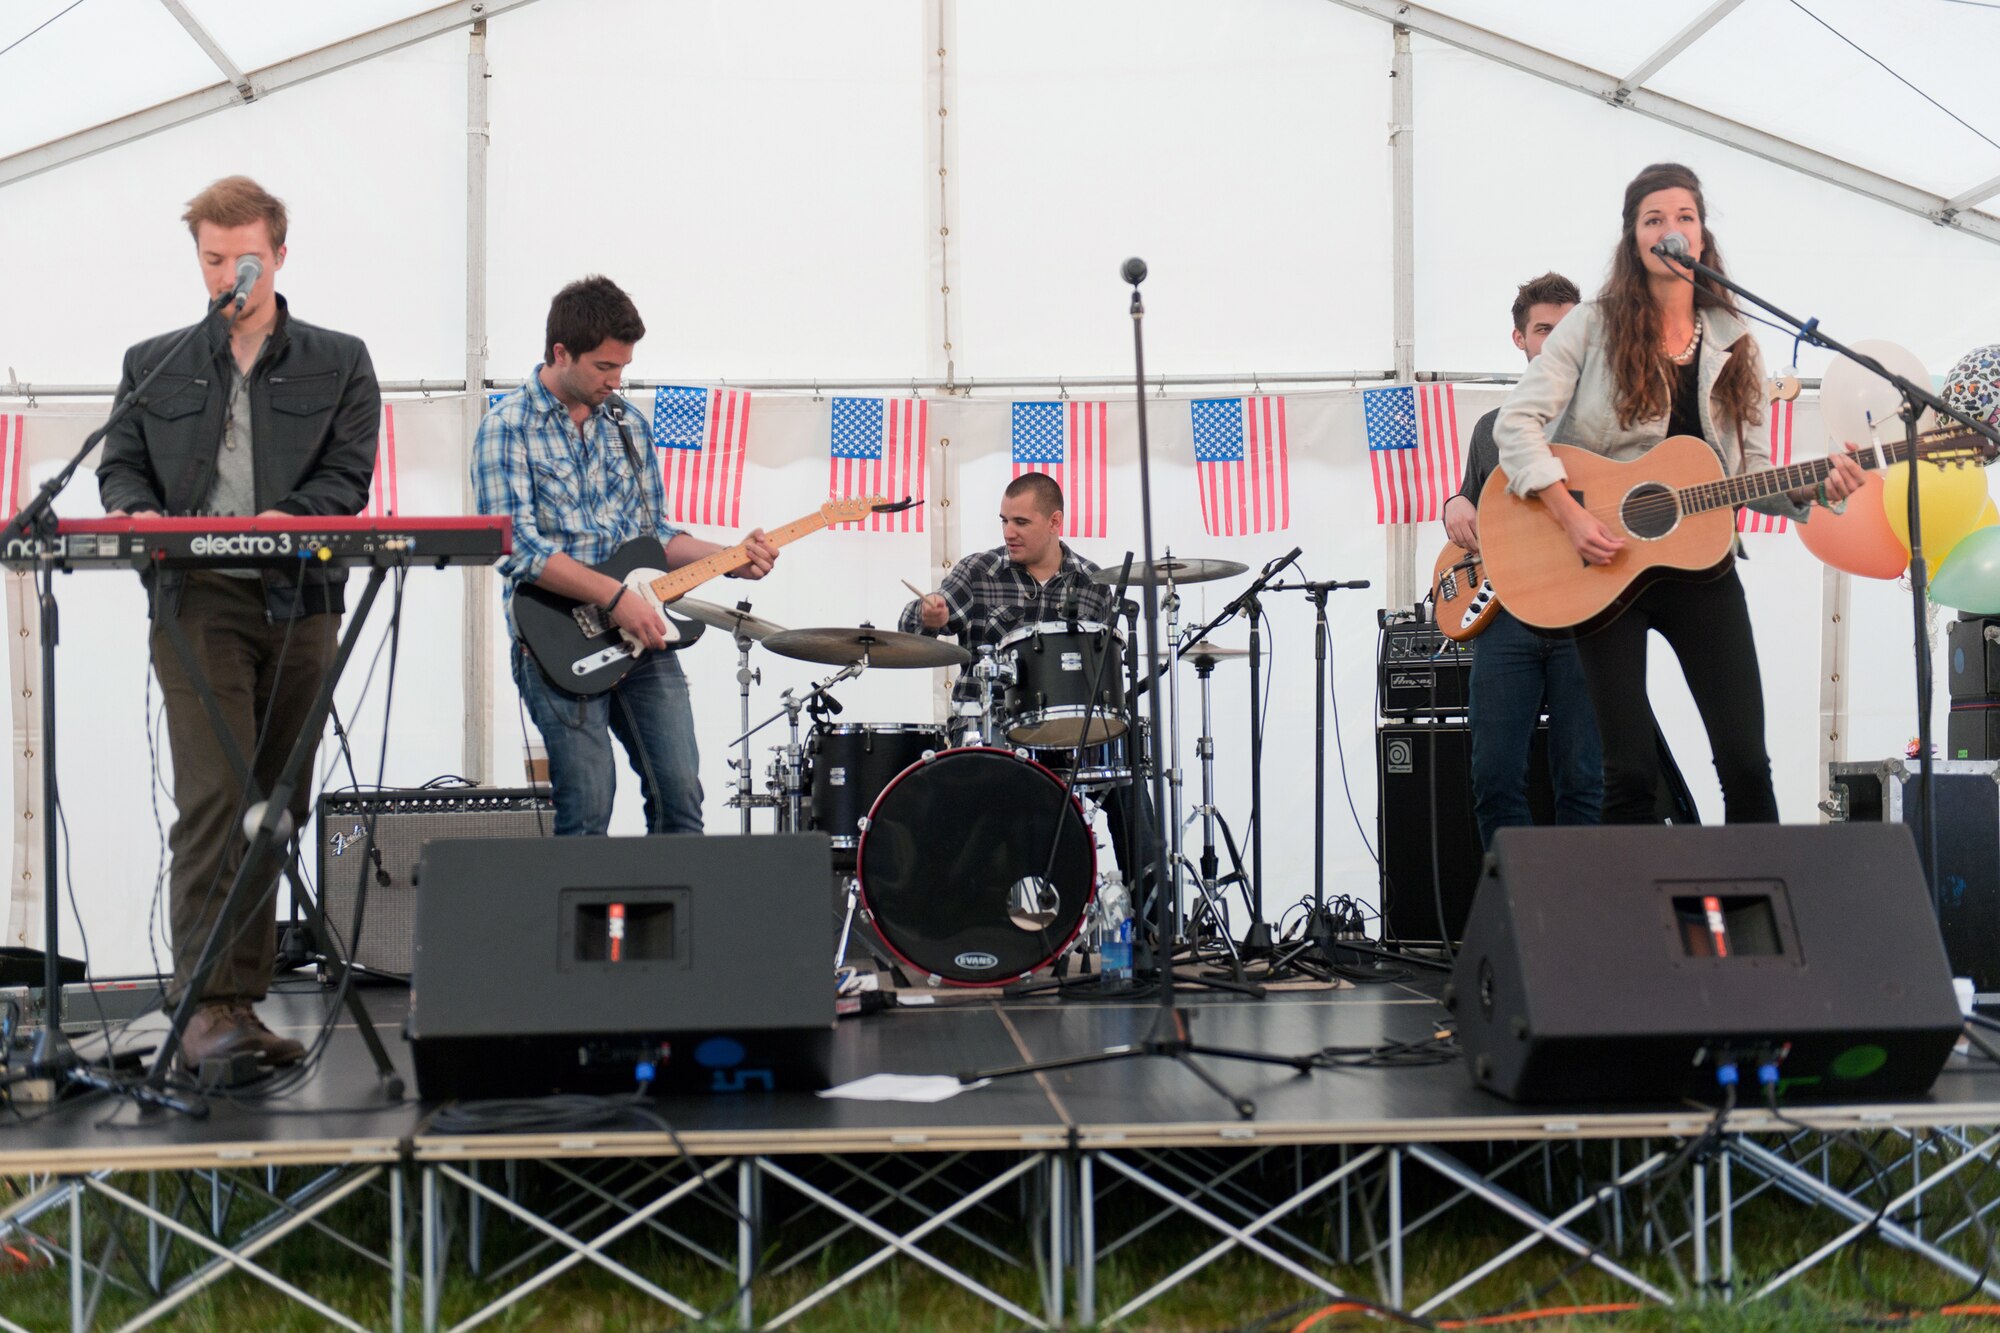 RAF ALCONBURY, United Kingdom – Armed Forces Entertainment presented a free concert by up-and-coming country music artist Nicole Frechette at RAF Alconbury July 2. Frechette also performed at RAF Croughton July 1. This is her third tour with AFE in support of the military. (U.S. Air Force photo by Staff Sgt. Brian Stives)